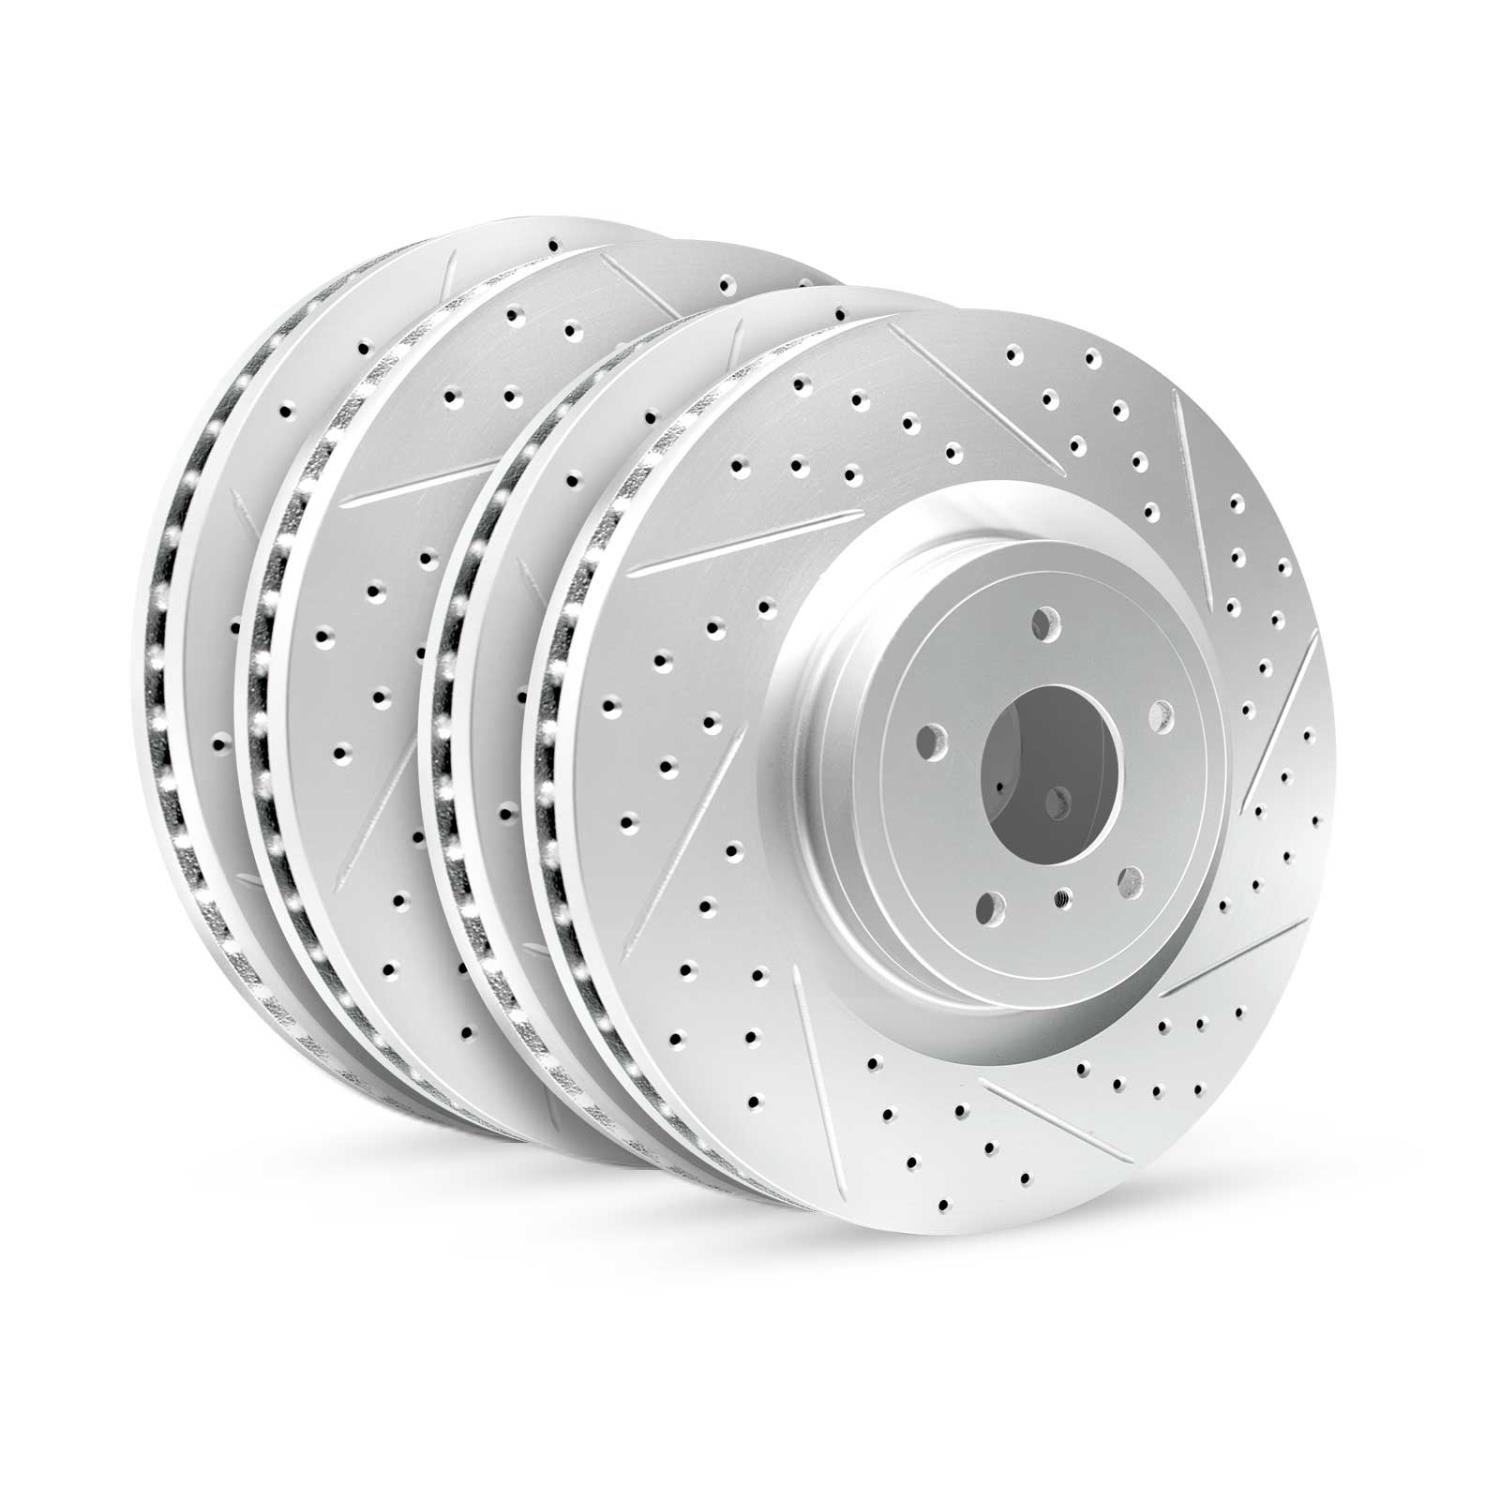 GEO-Carbon Drilled/Slotted Rotors, 2009-2017 Fits Multiple